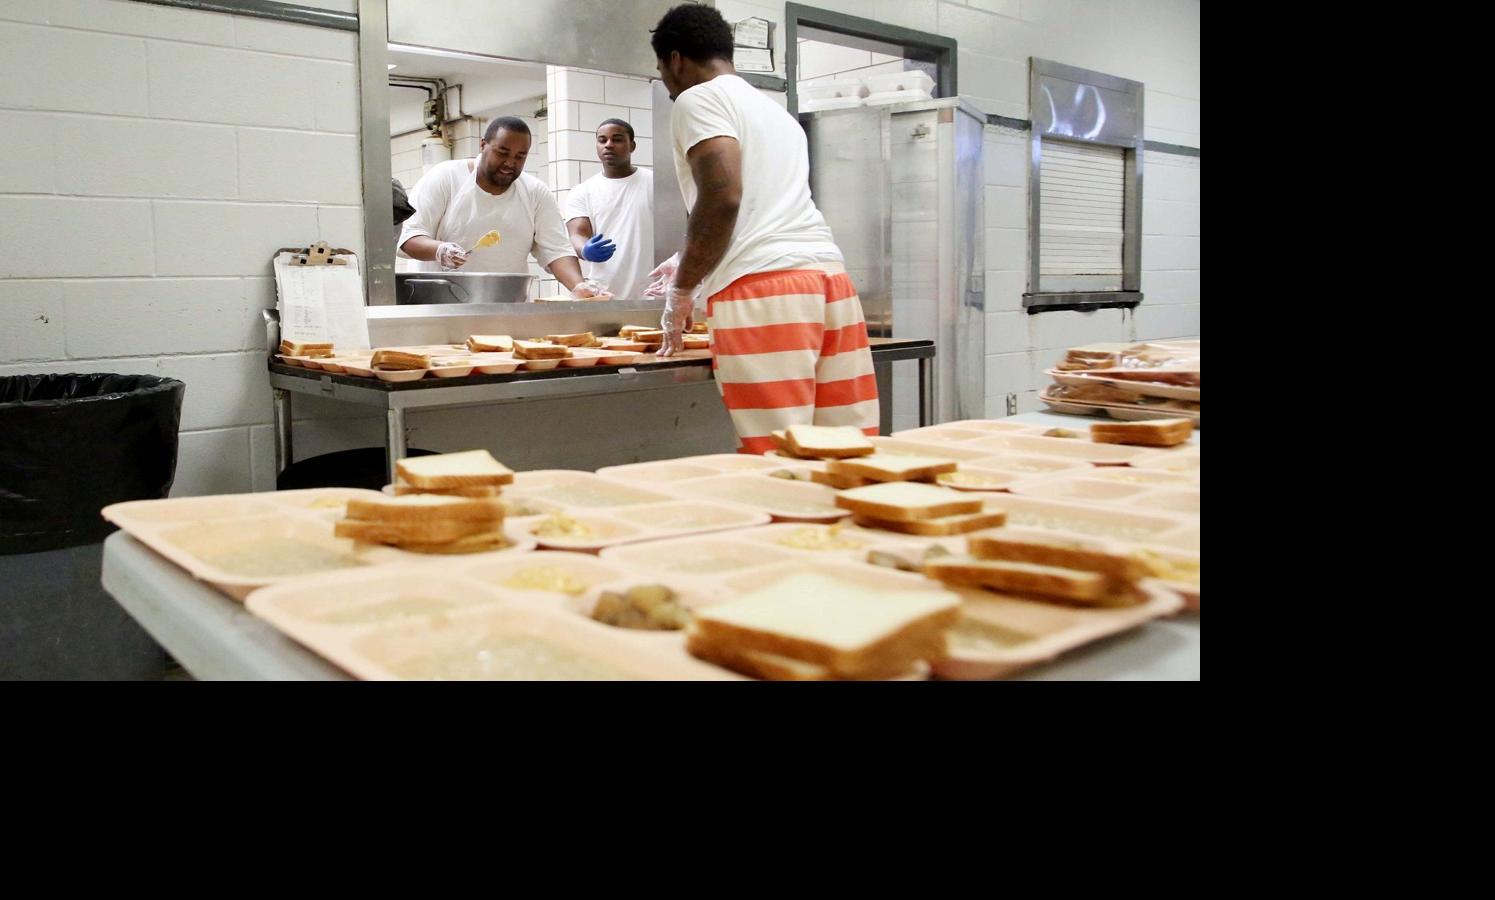 As Some Sheriffs Face Scrutiny Over Inmate Food Money Calhoun Countys Jail Kitchen Is Funded